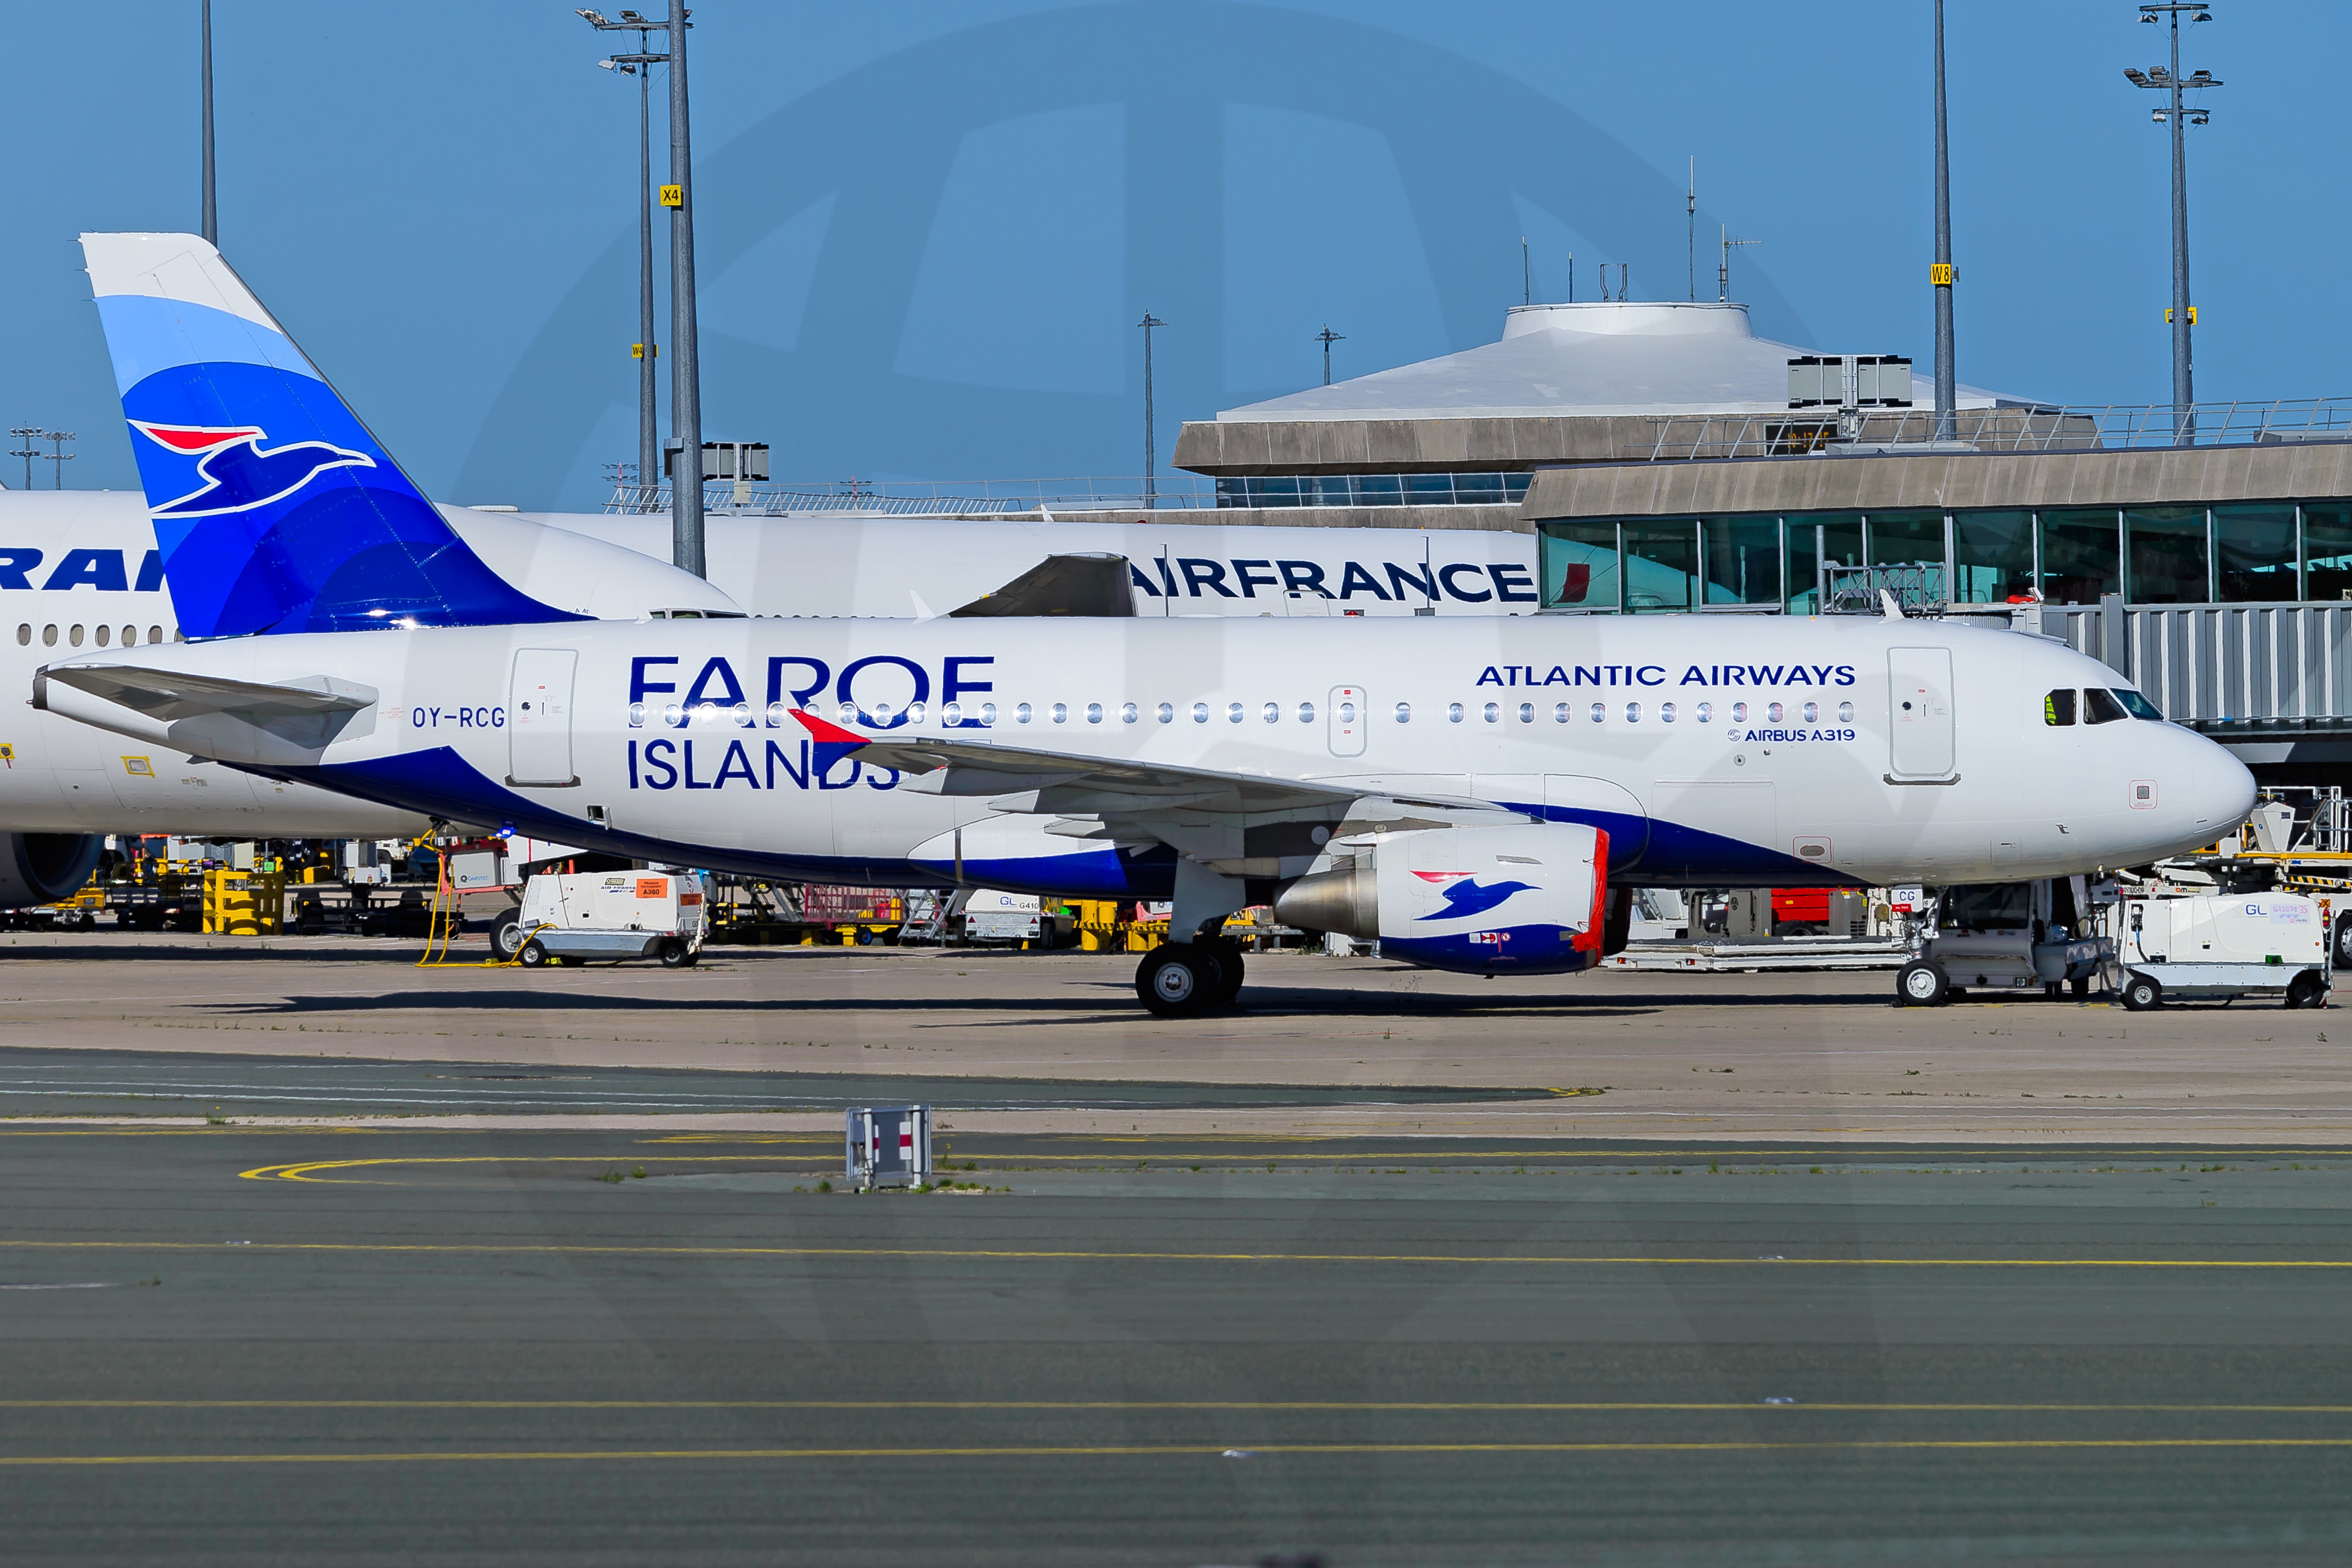 Photo of OY-RCG - Atlantic Airways Airbus A319 by 